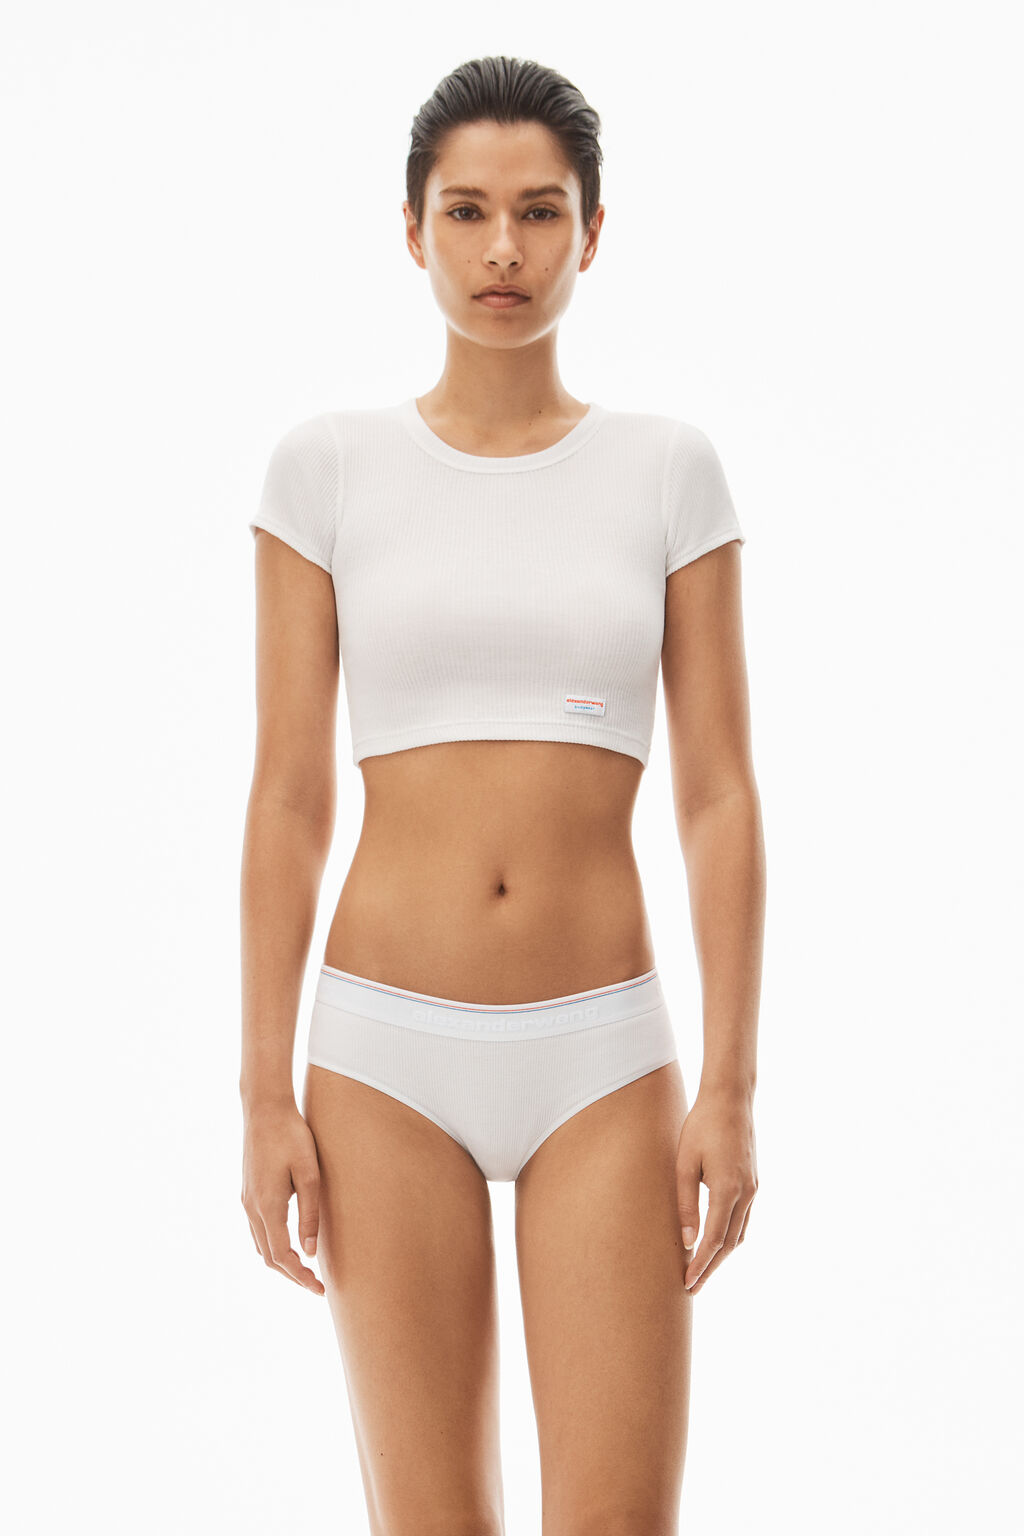 alexanderwang Cropped Racerback Tank in Ribbed Cotton Jersey WHITE